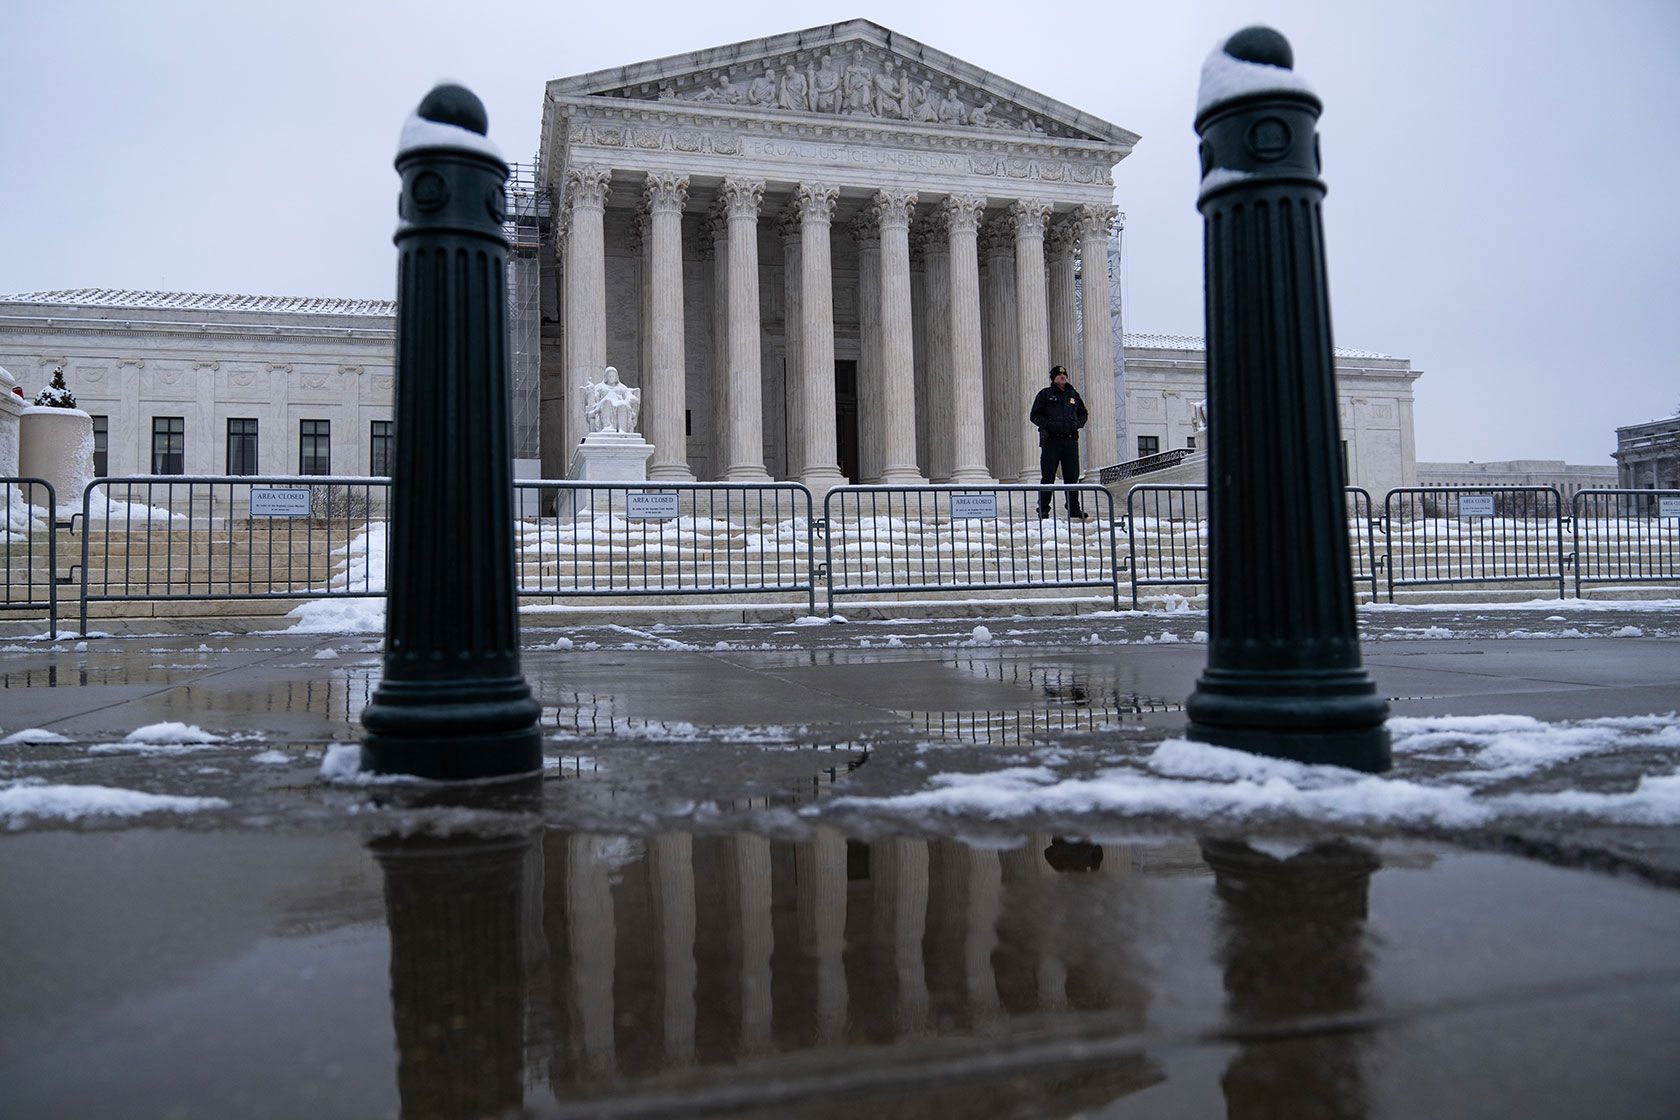 A security officer stands outside the U.S. Supreme Court building.